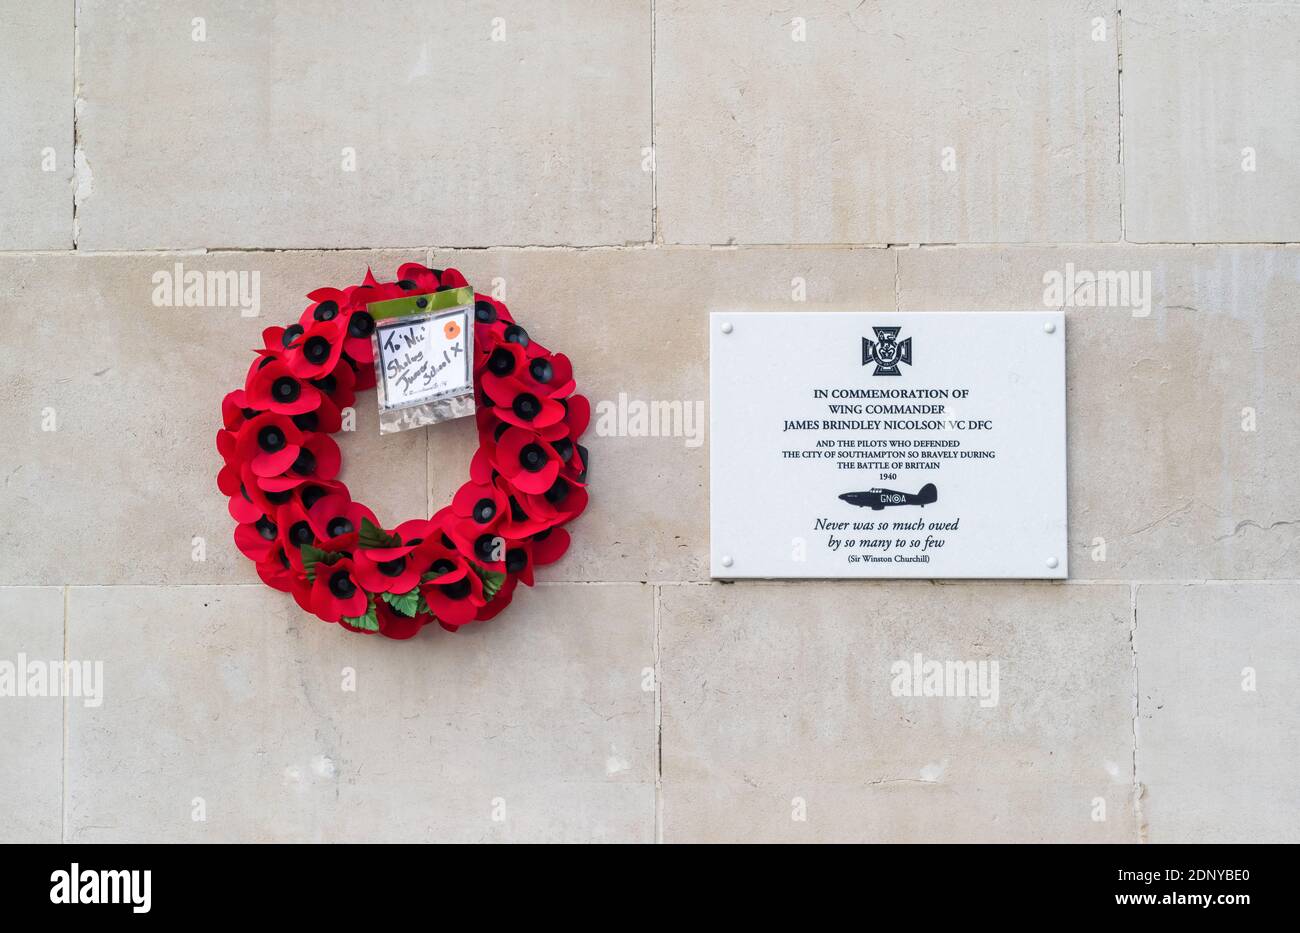 Remembrance poppy wreath commemorating James Brindley Nicolson wing commander during the Battle of Britain 1940 at Guildhall Square, Southampton, UK Stock Photo